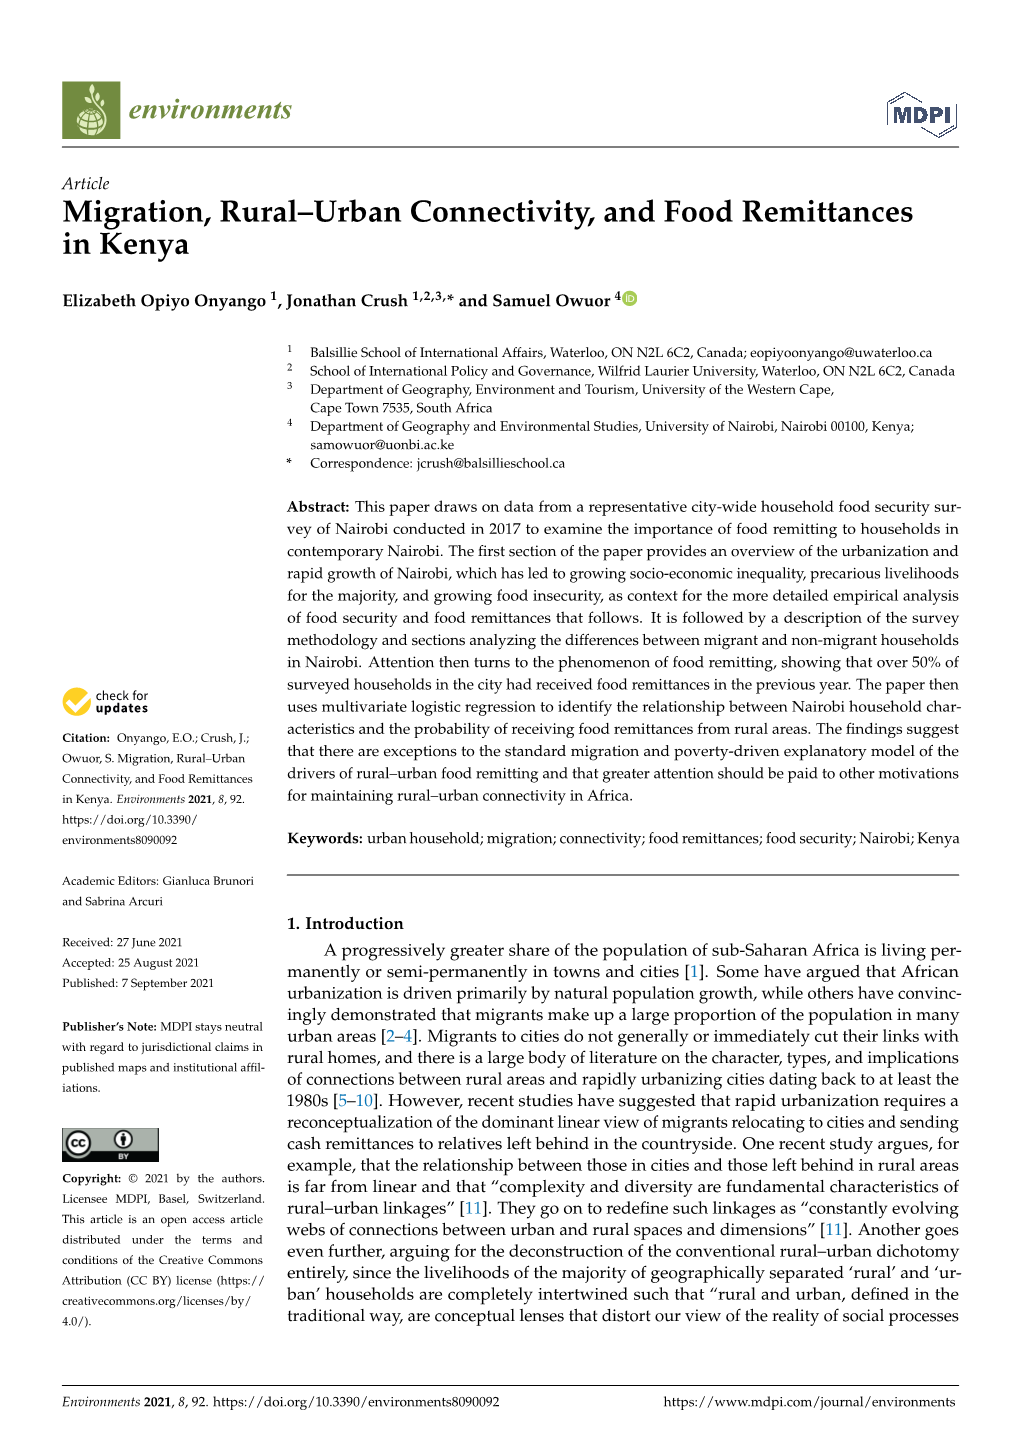 Migration, Rural–Urban Connectivity, and Food Remittances in Kenya